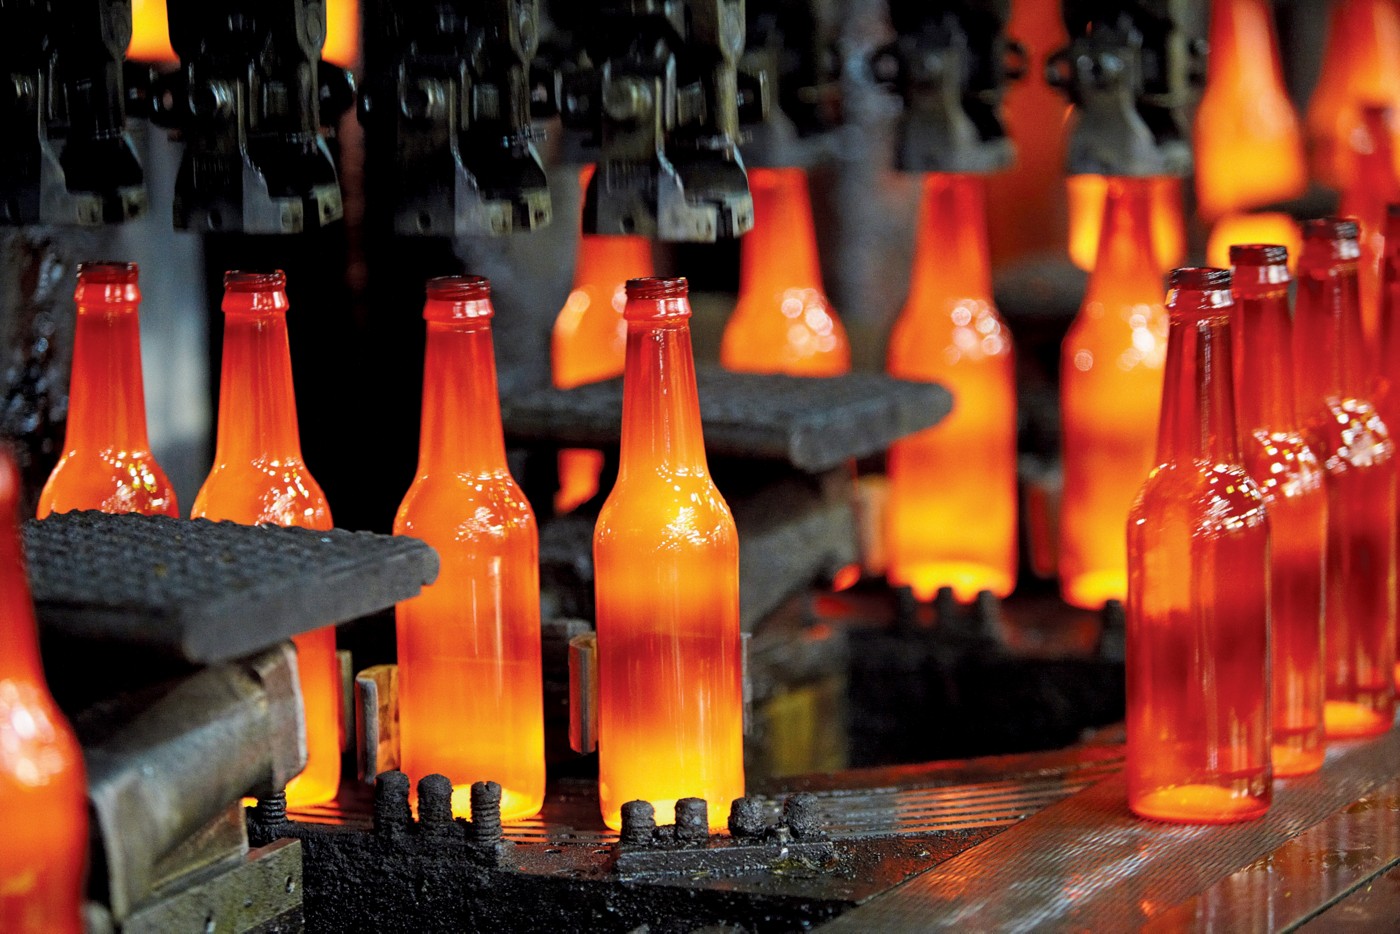 What It Takes to Make Food-Safe Glass Bottles